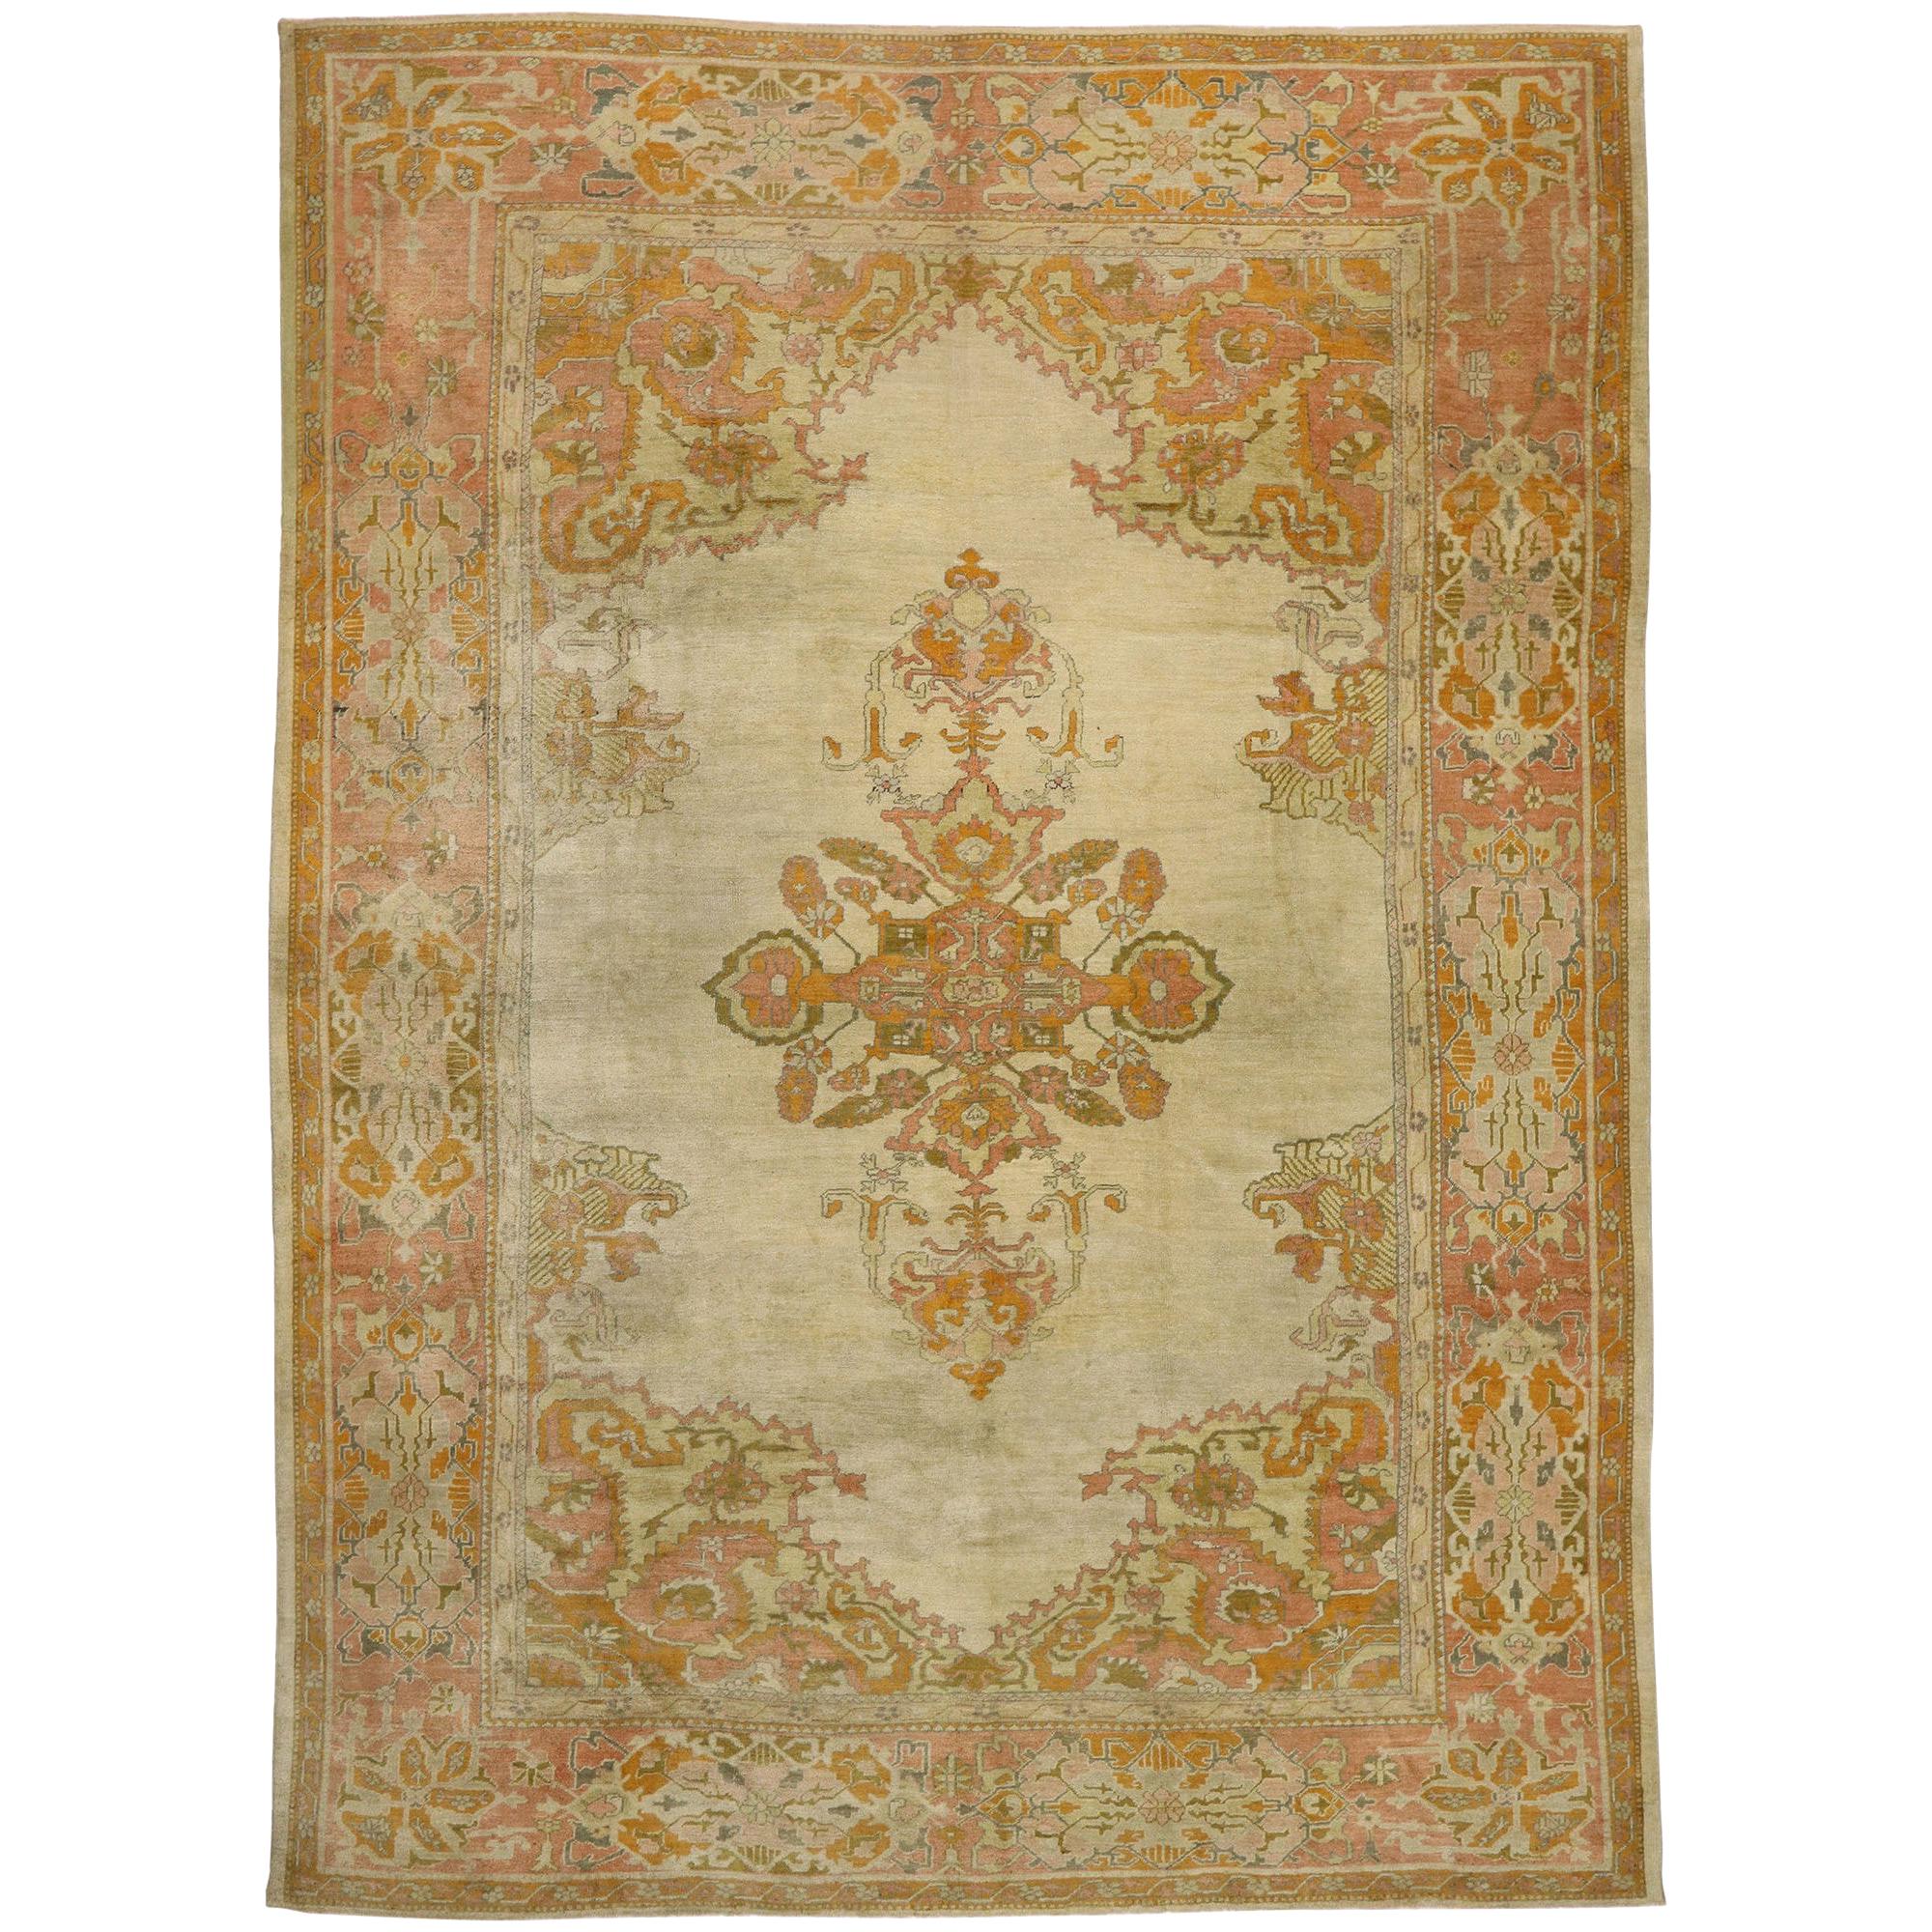 Distressed Antique Turkish Oushak Rug with Rustic Arts & Crafts Style